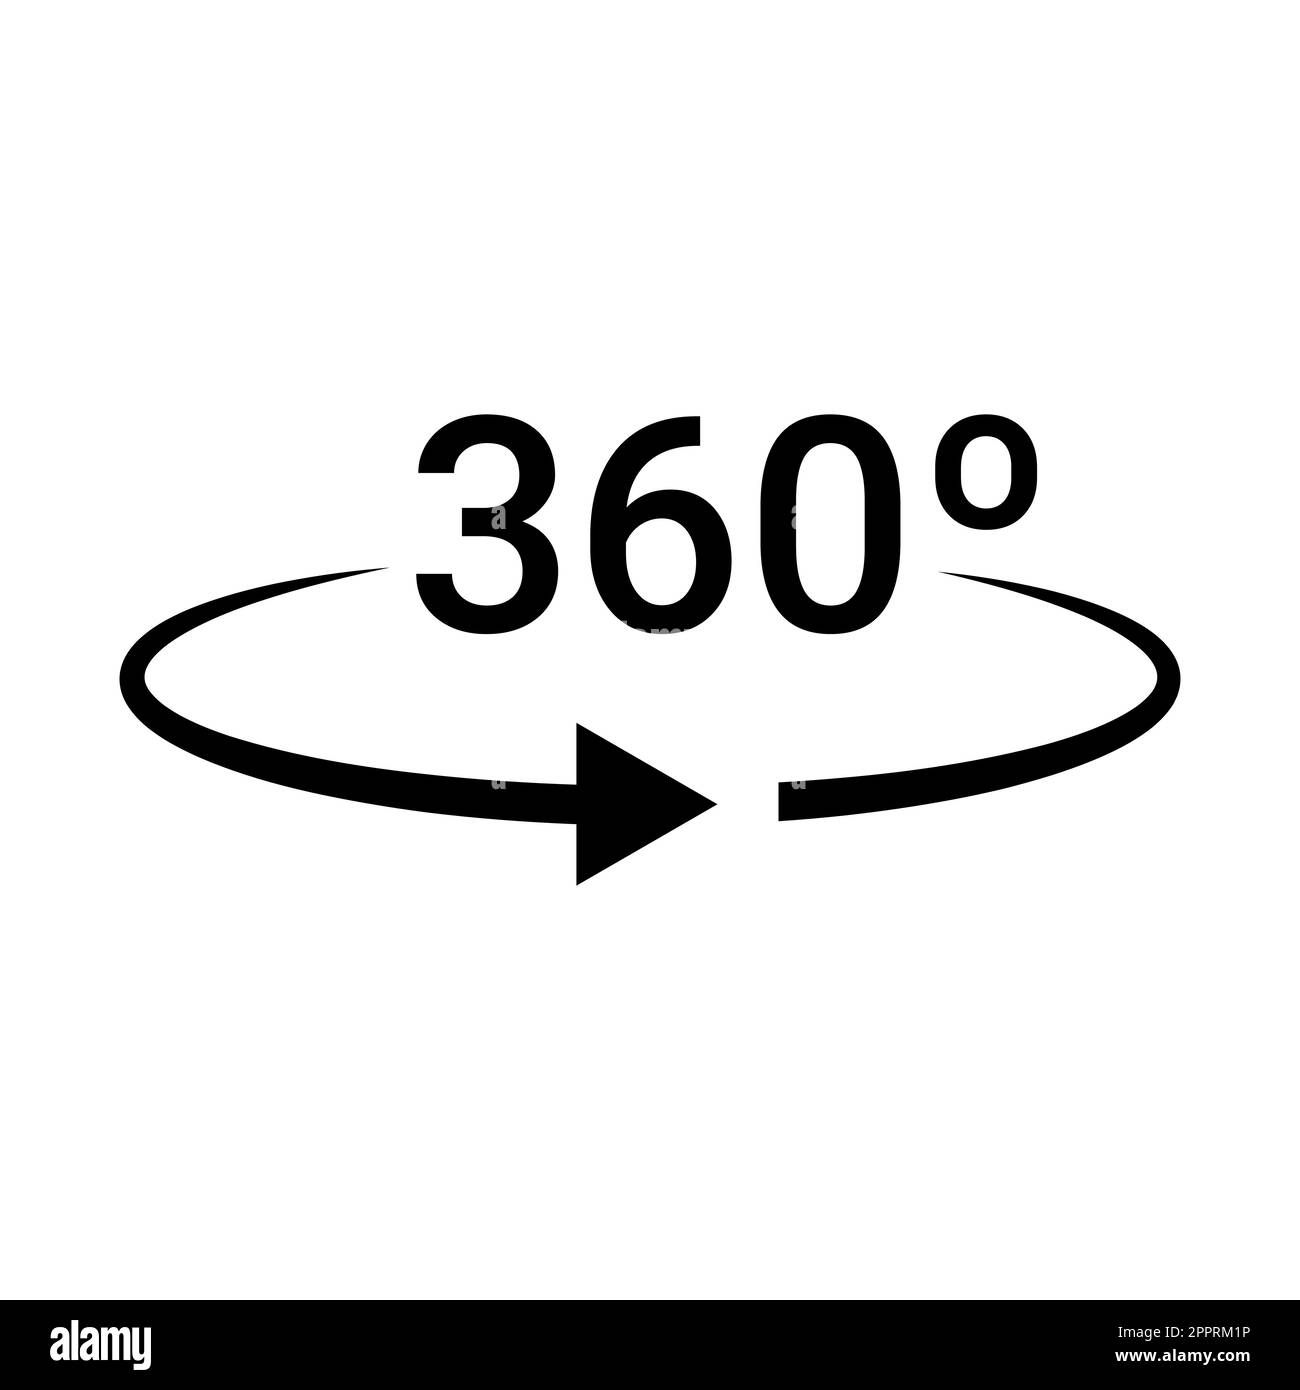 360 degrees black vector icon on white background Stock Vector